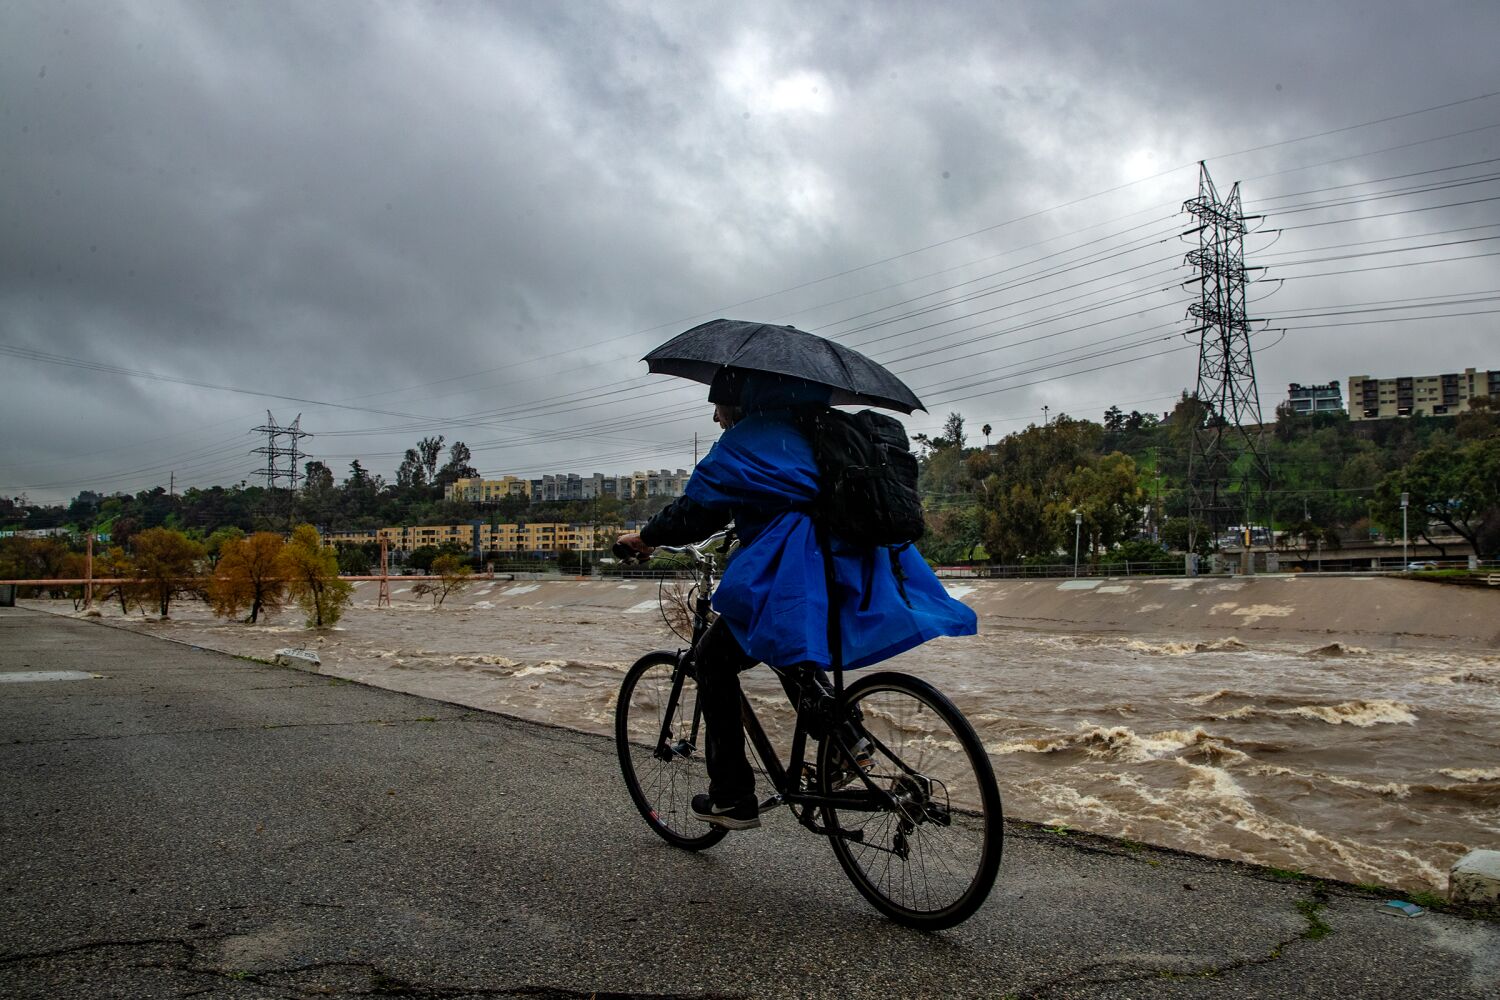 Another intense storm hits Southern California with damaging winds, threats of flooding